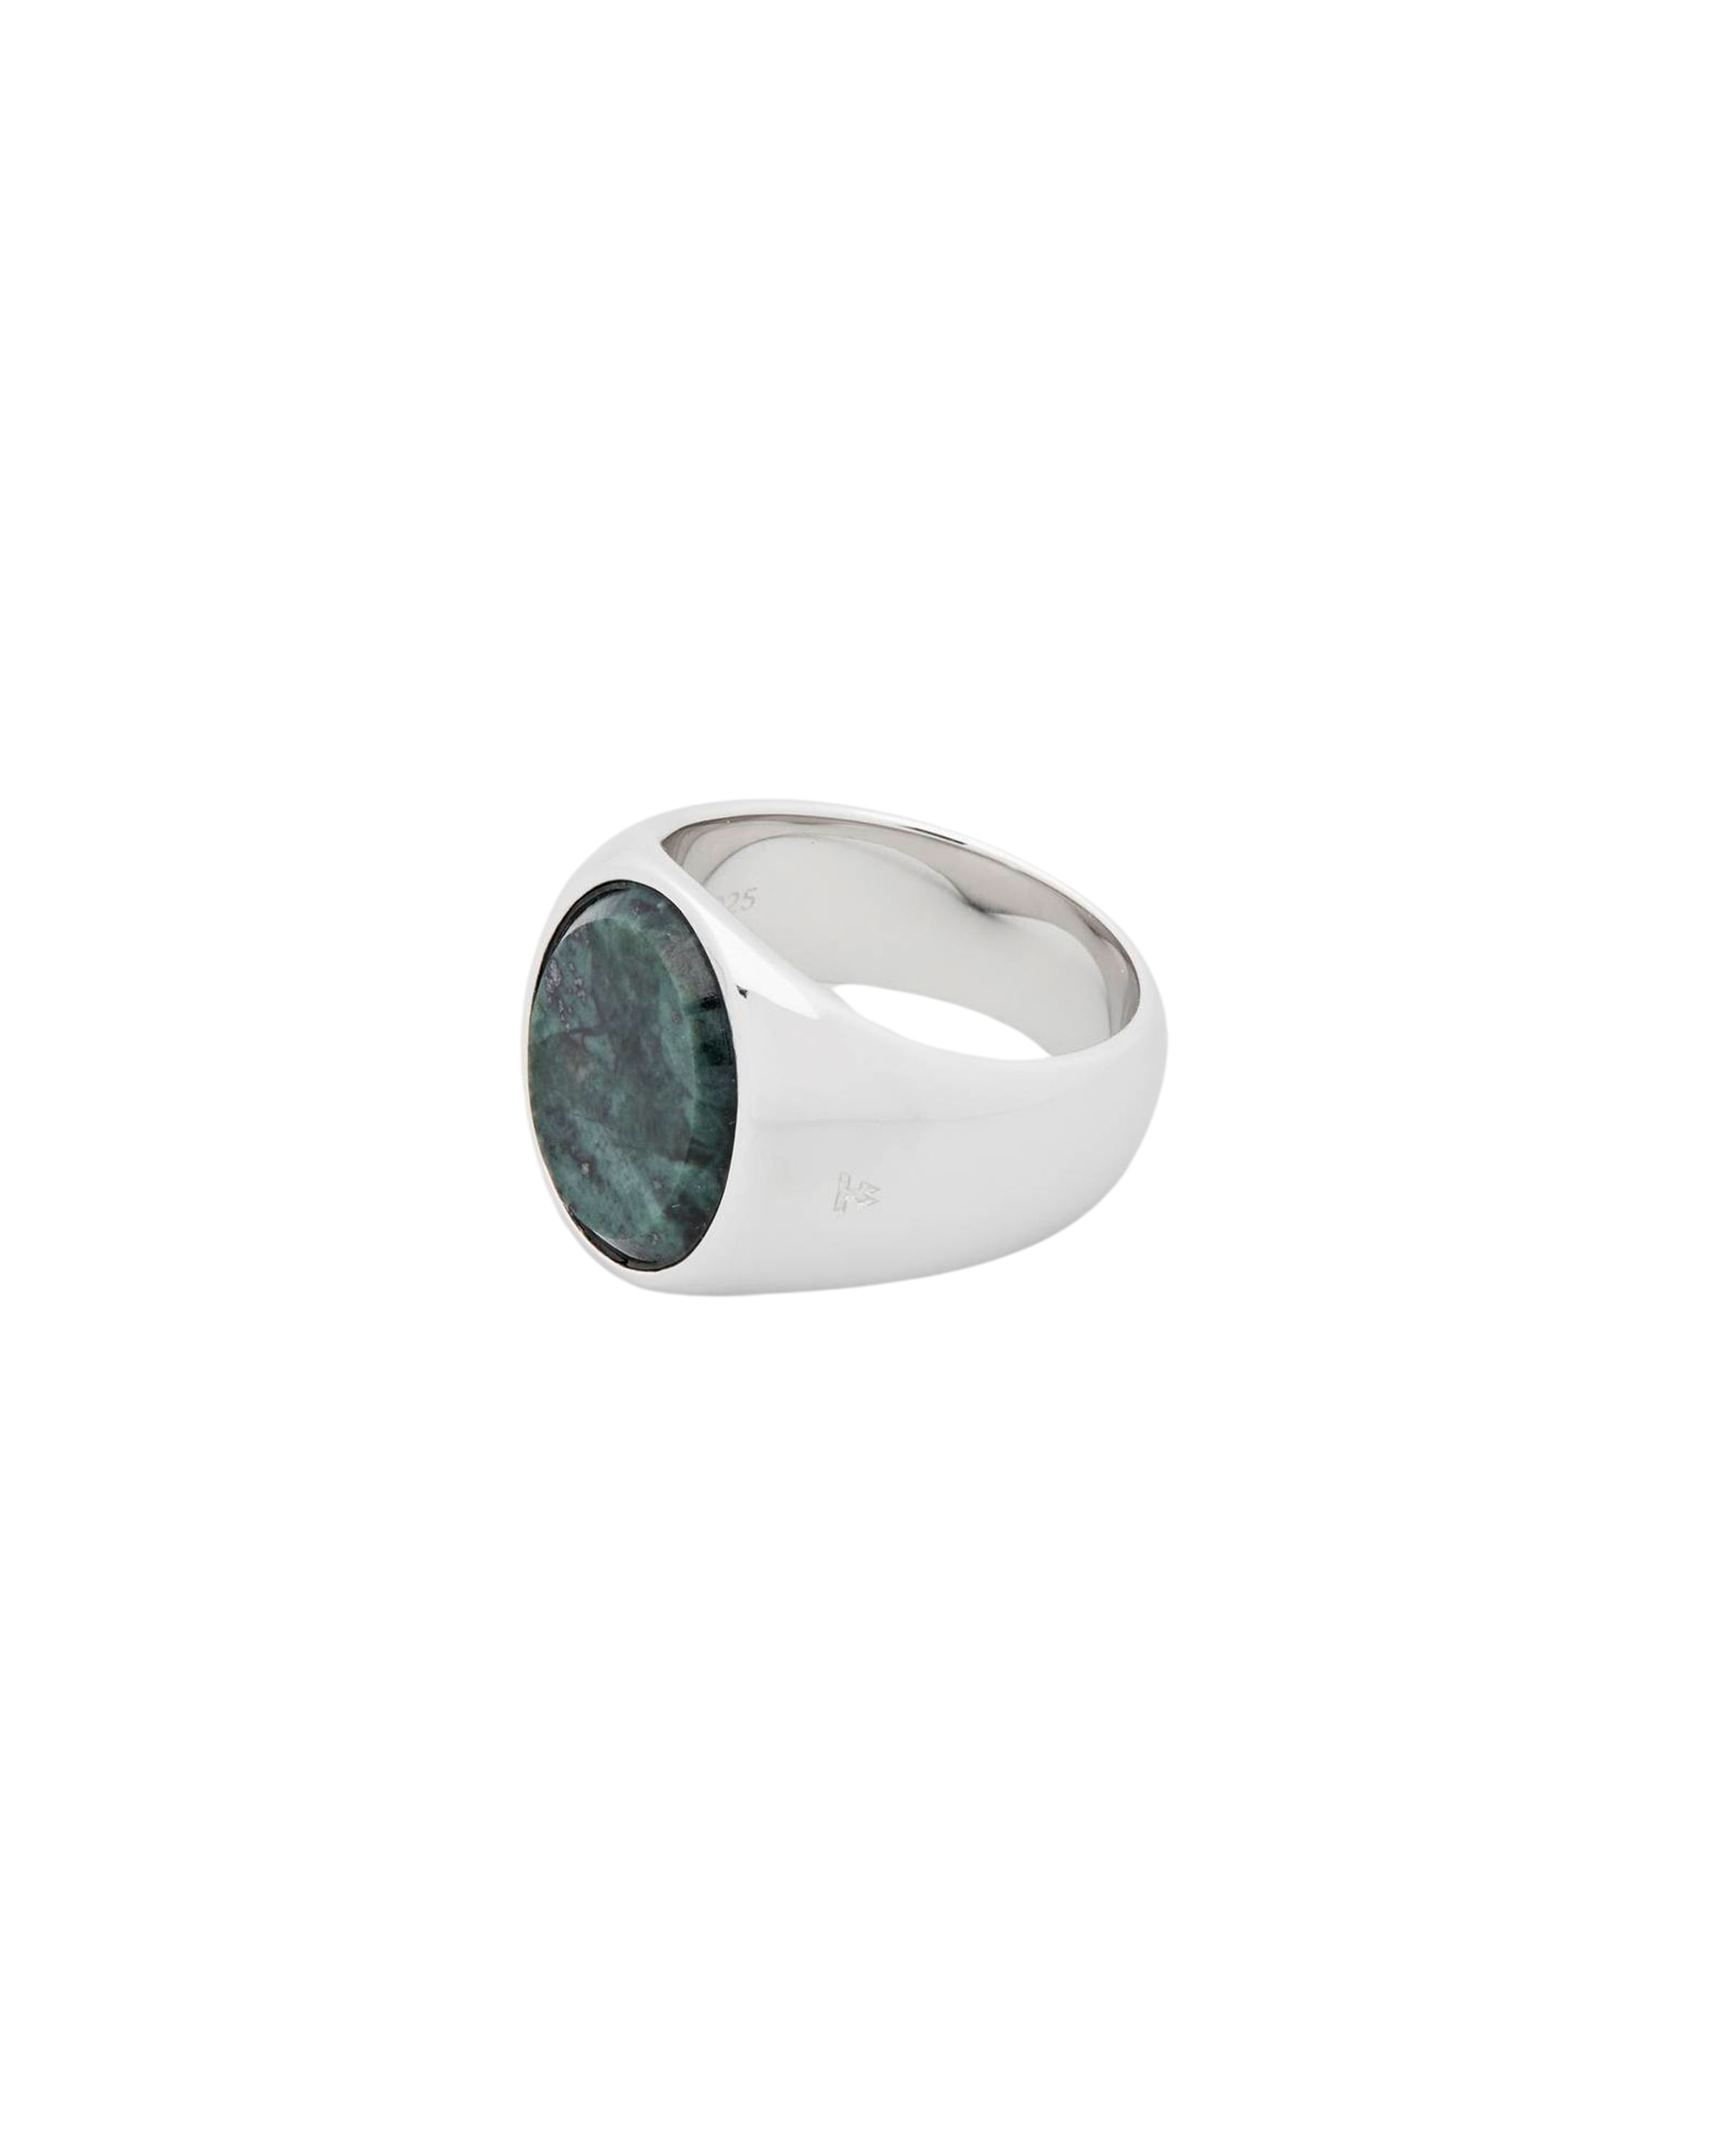 Oval Green Marble $289 Tom Wood Jewelry Rings Silver